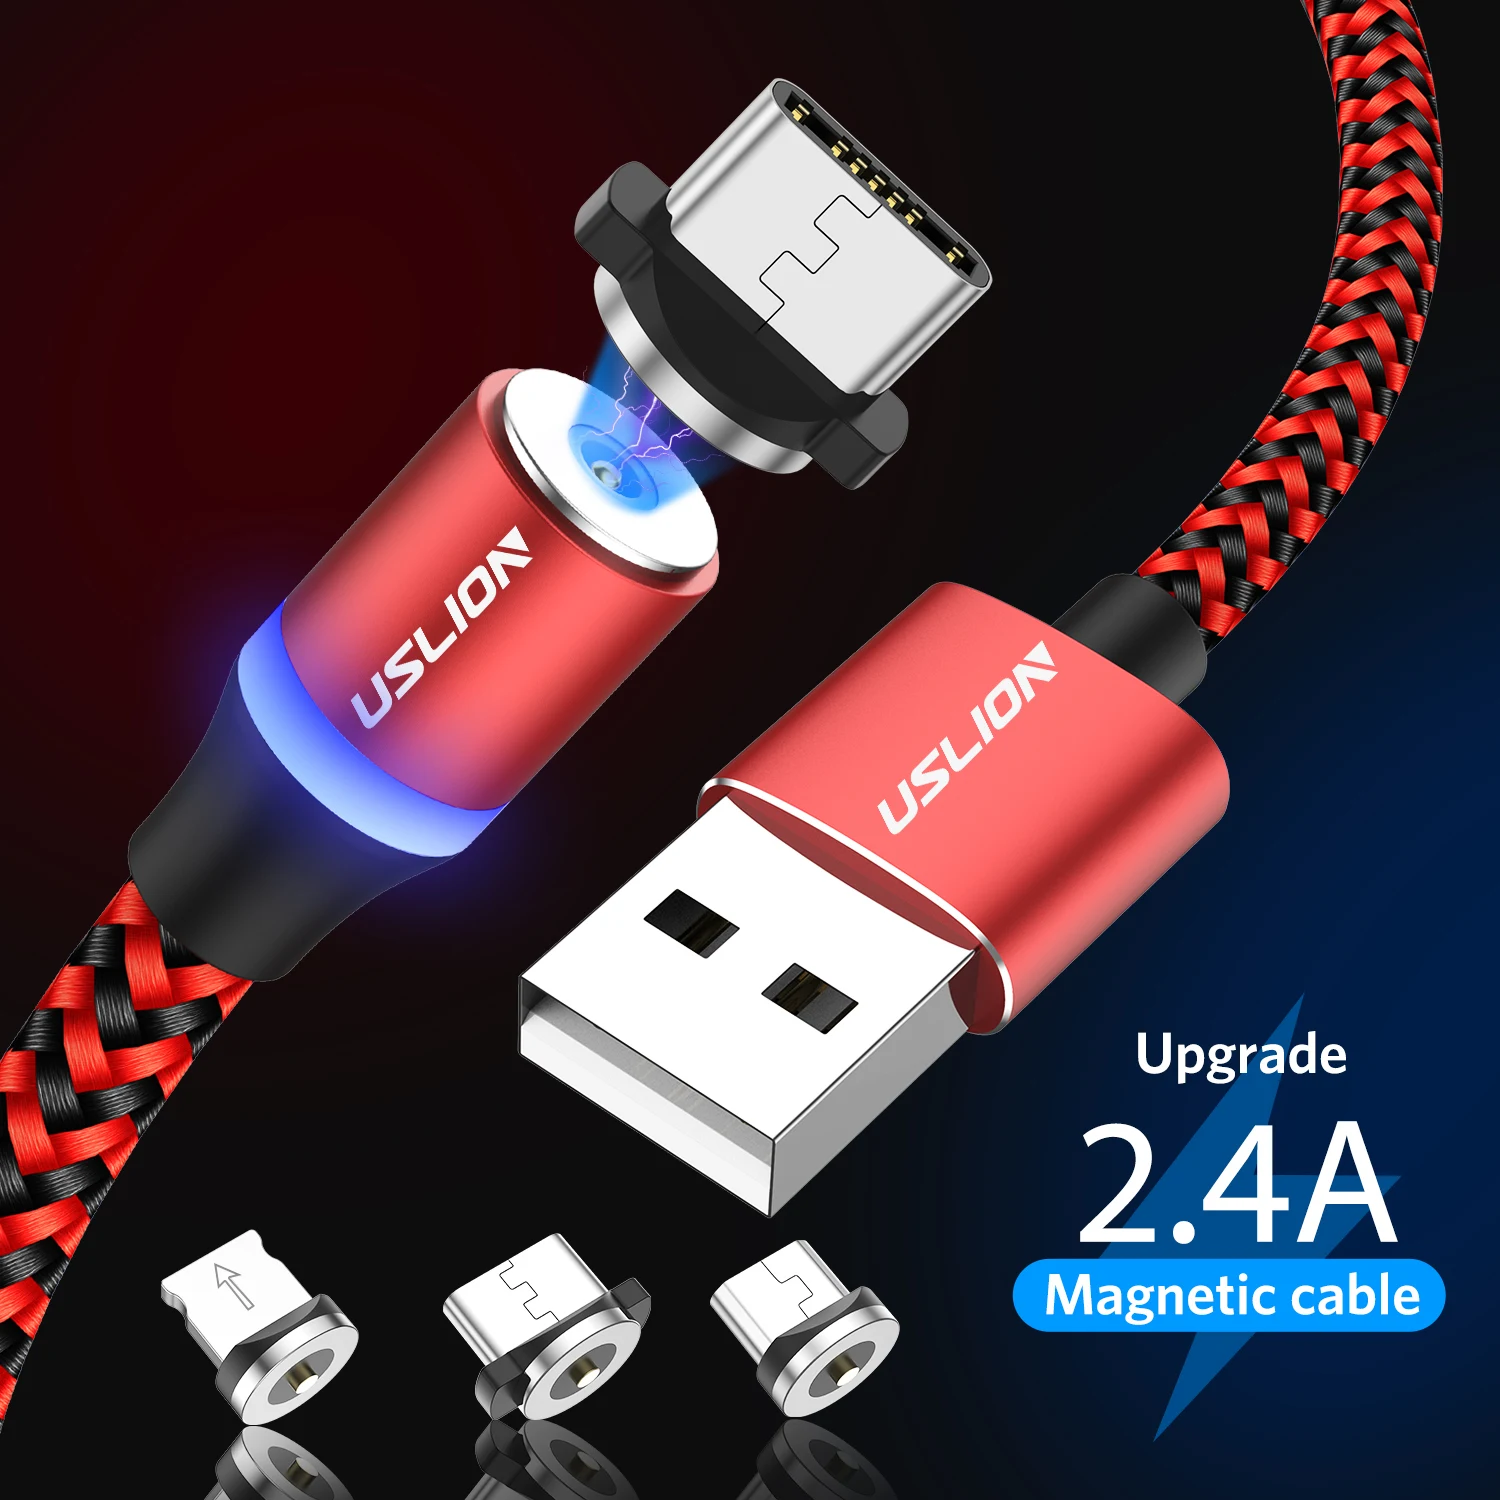 

USLION 3 in1 Magnetic USB Cable Nylon Weave Micro USB Cable 2M USB Cable for Type-c, N/a